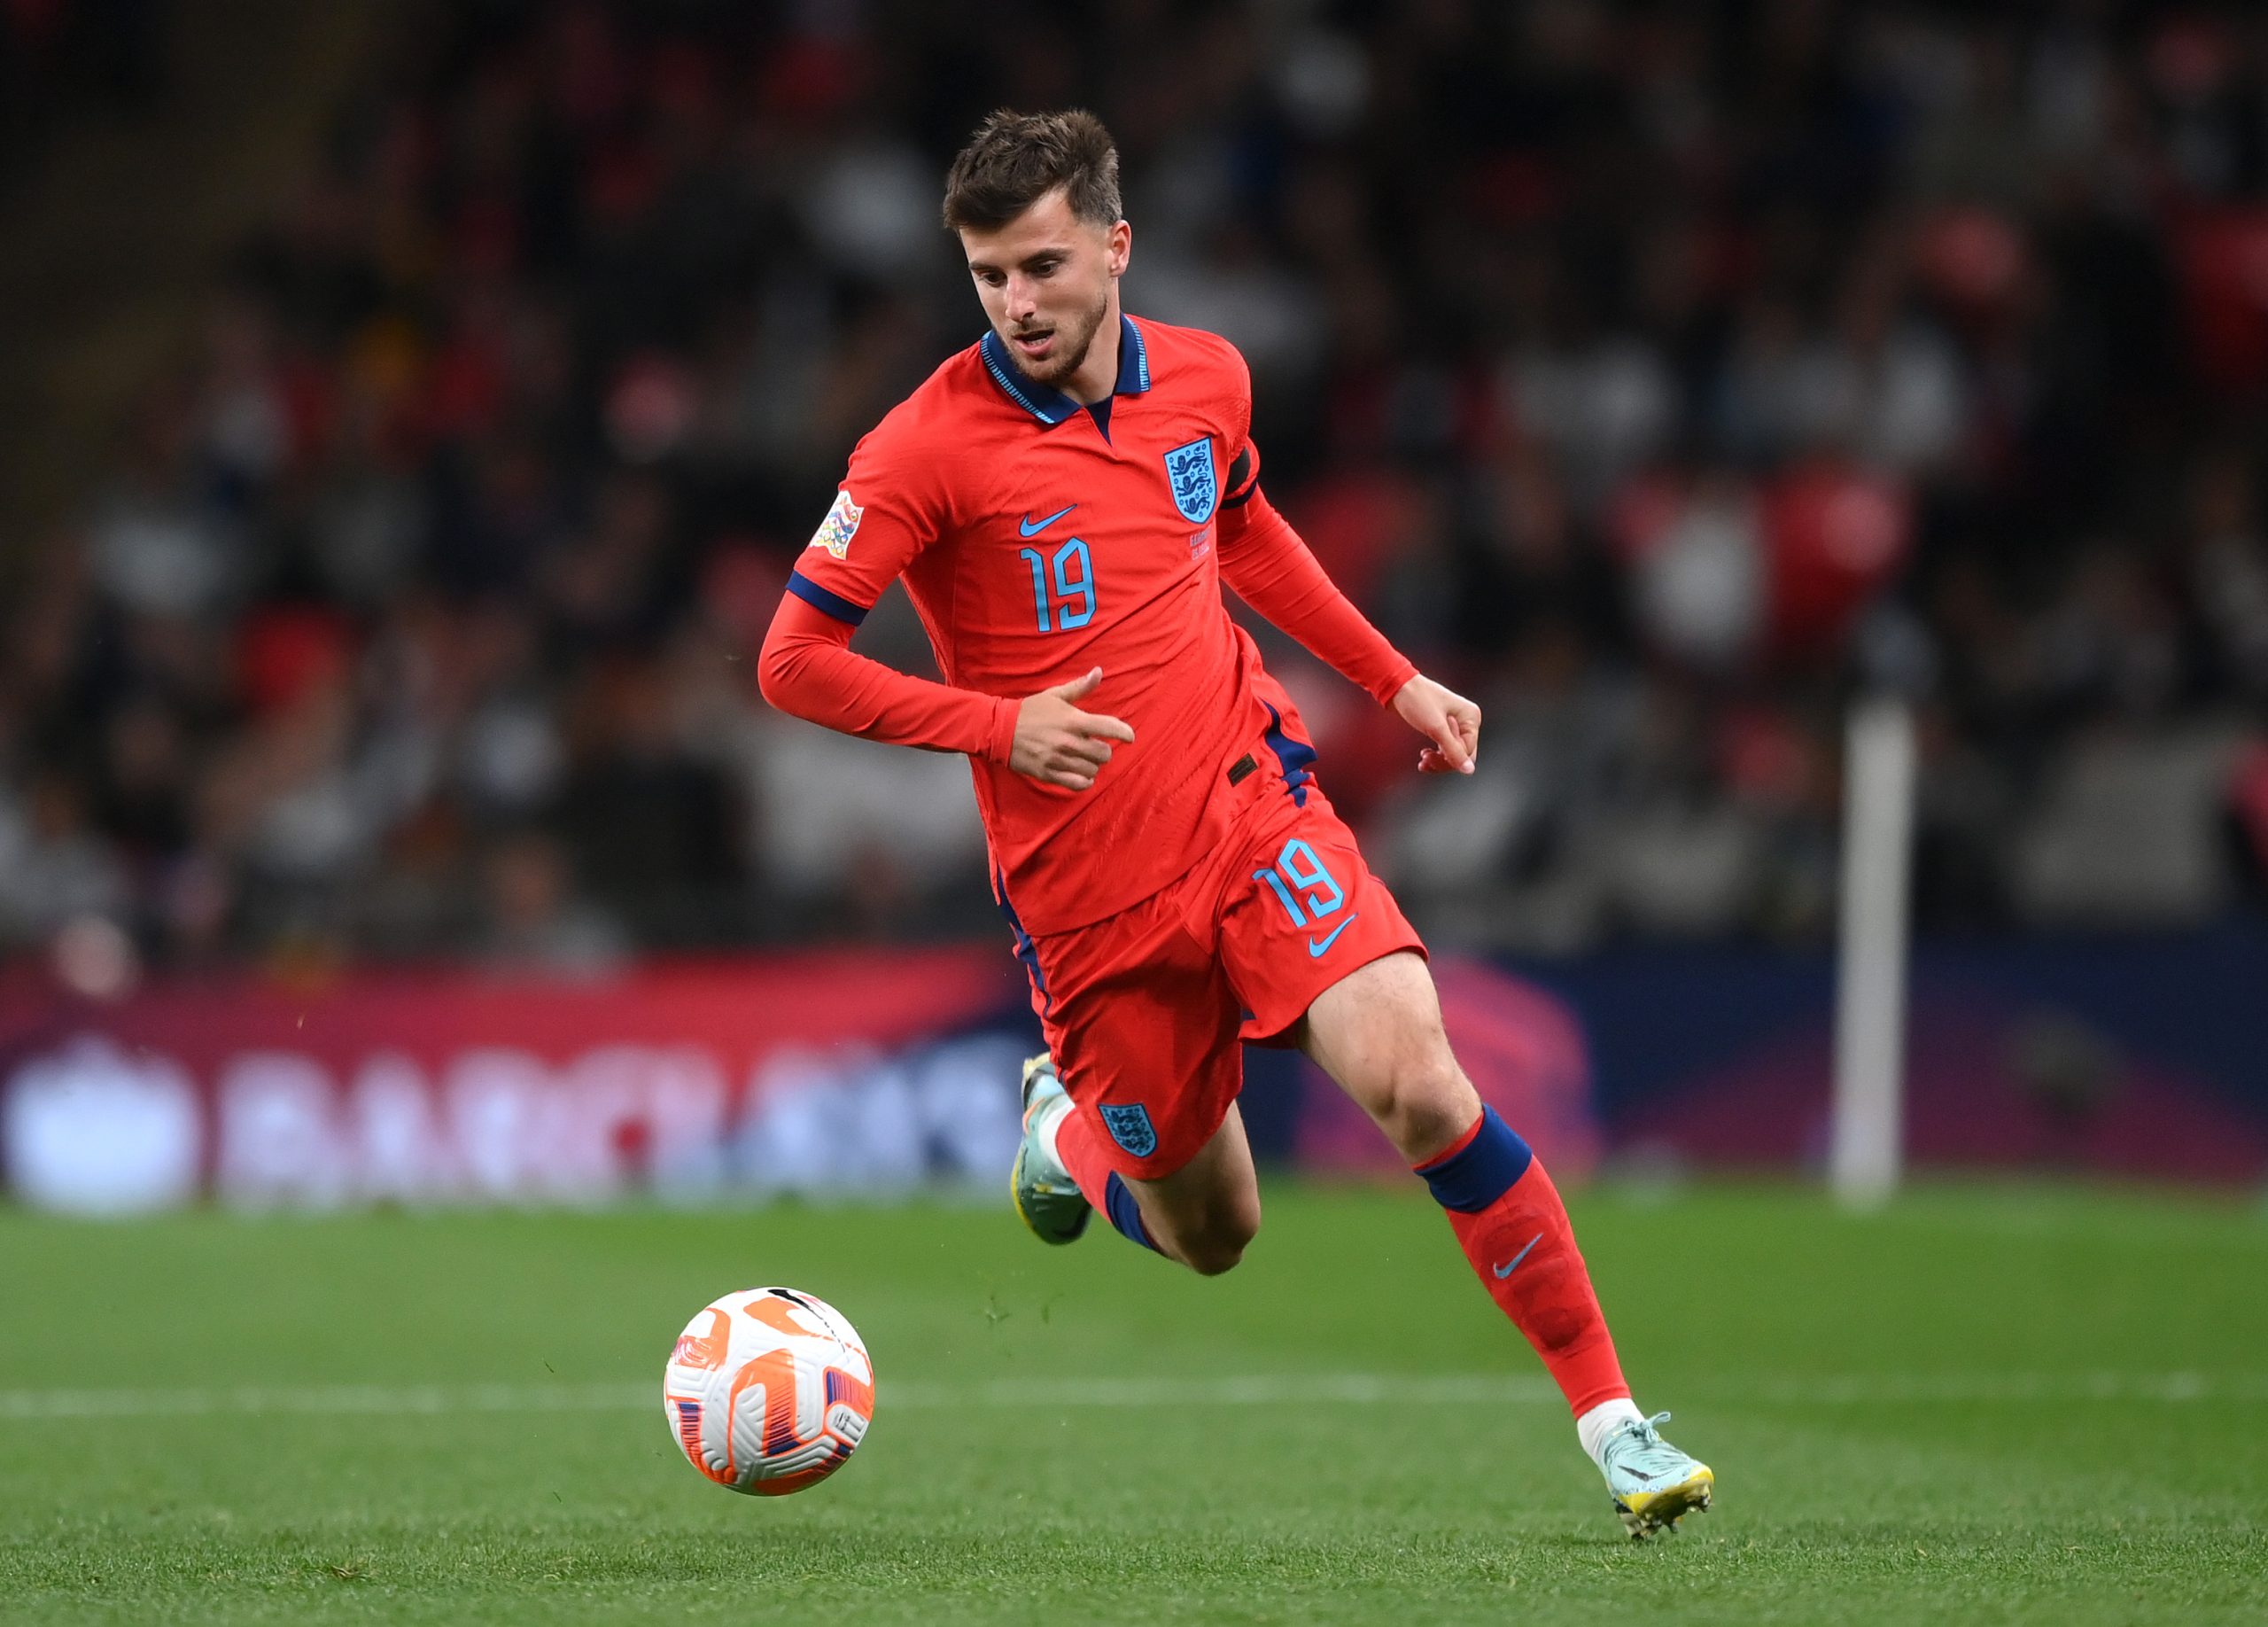 Chelsea midfielder Mason Mount insists he has the courage to take the penalty for England at the World Cup.